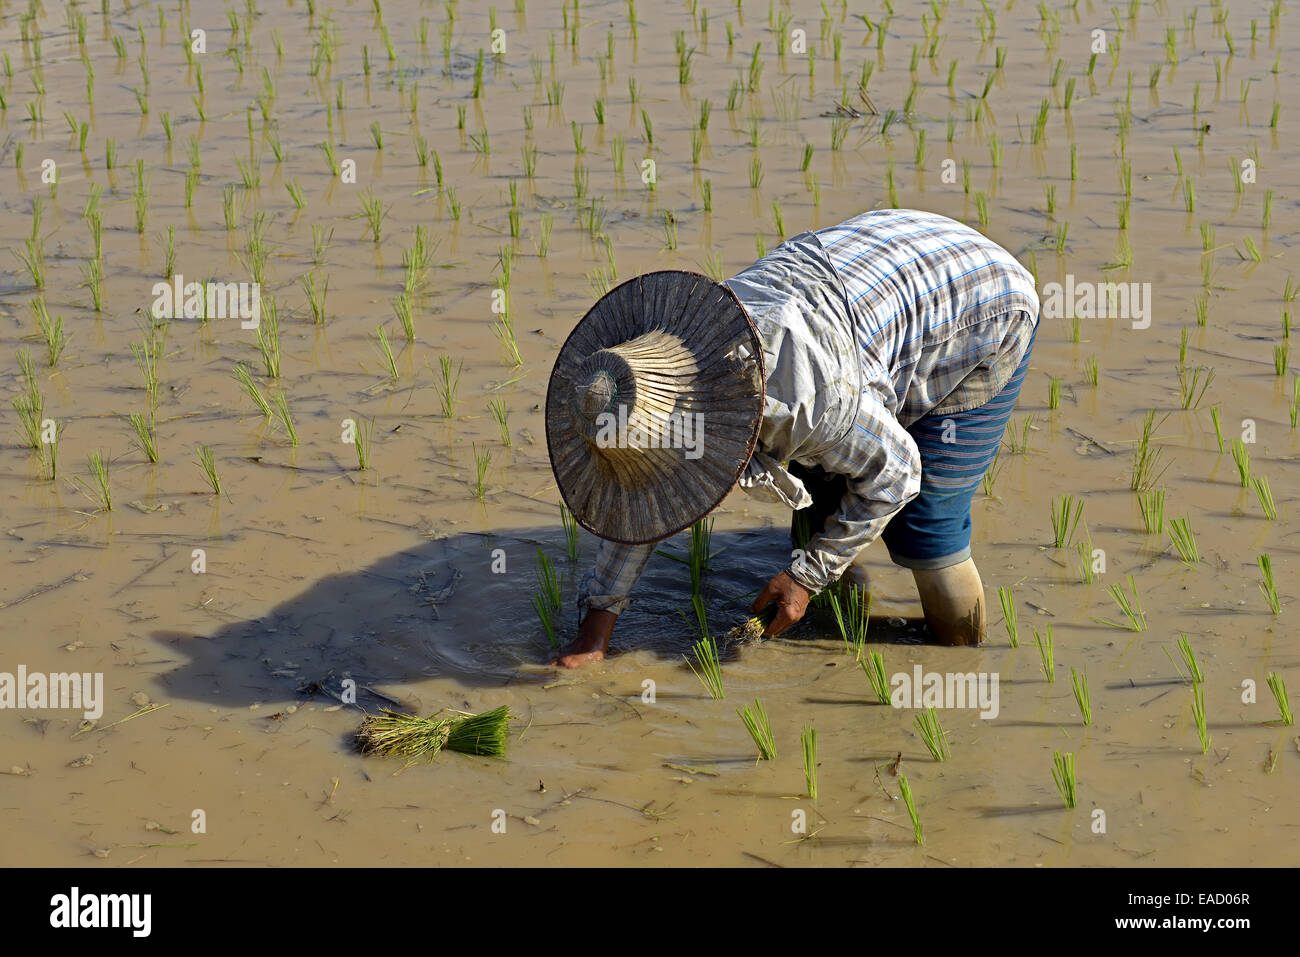 Rice cultivation, worker in a rice paddy, Northern Thailand, Thailand Stock Photo